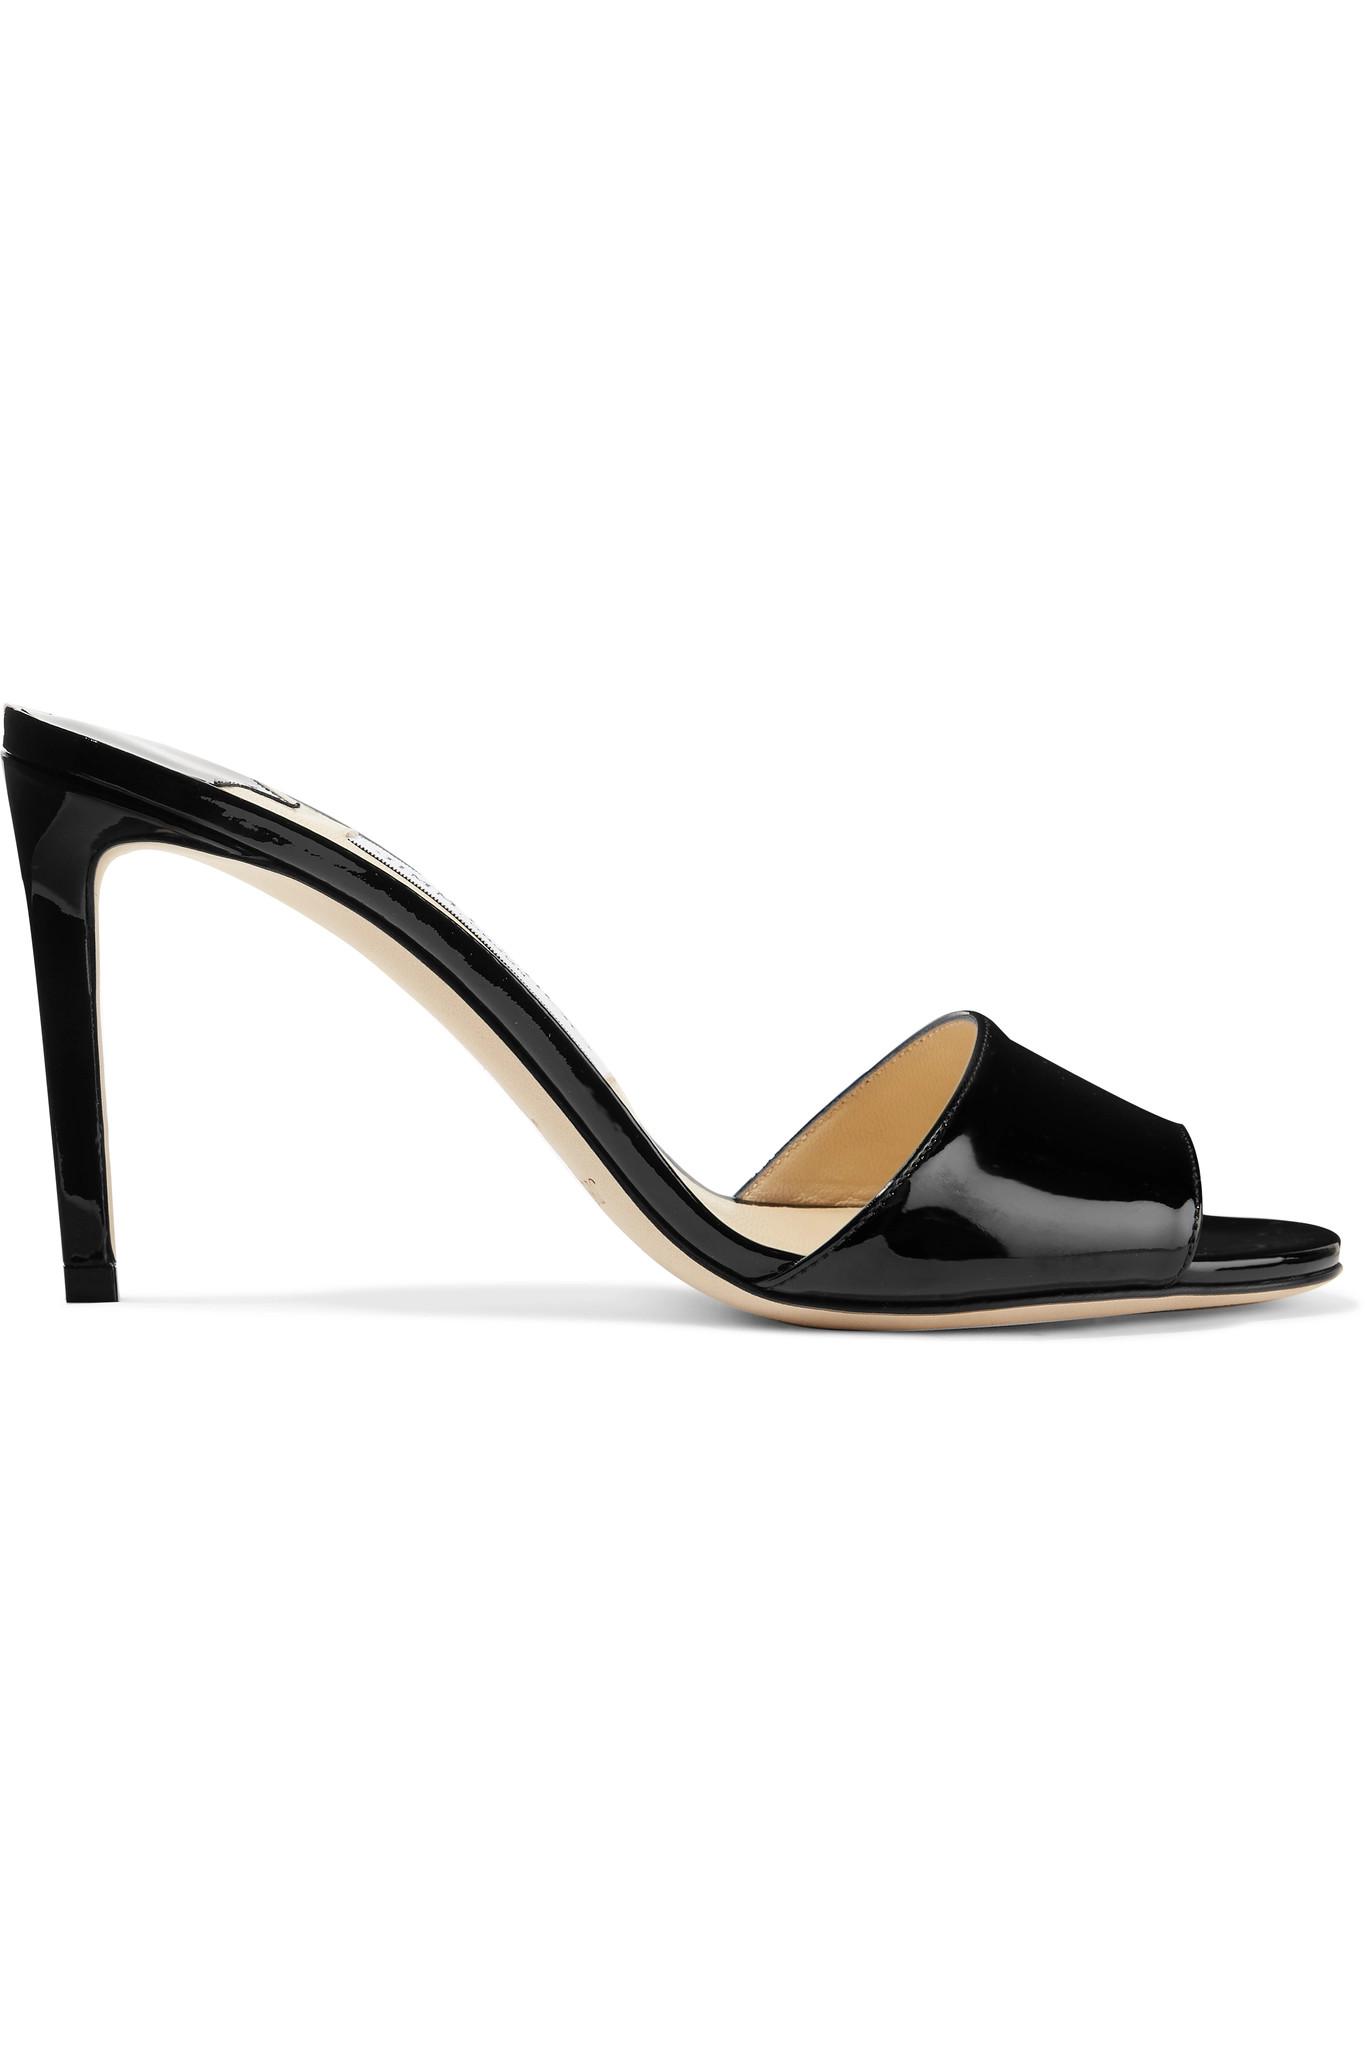 Jimmy Choo Stacey 85 Patent-leather Mules in Black - Lyst